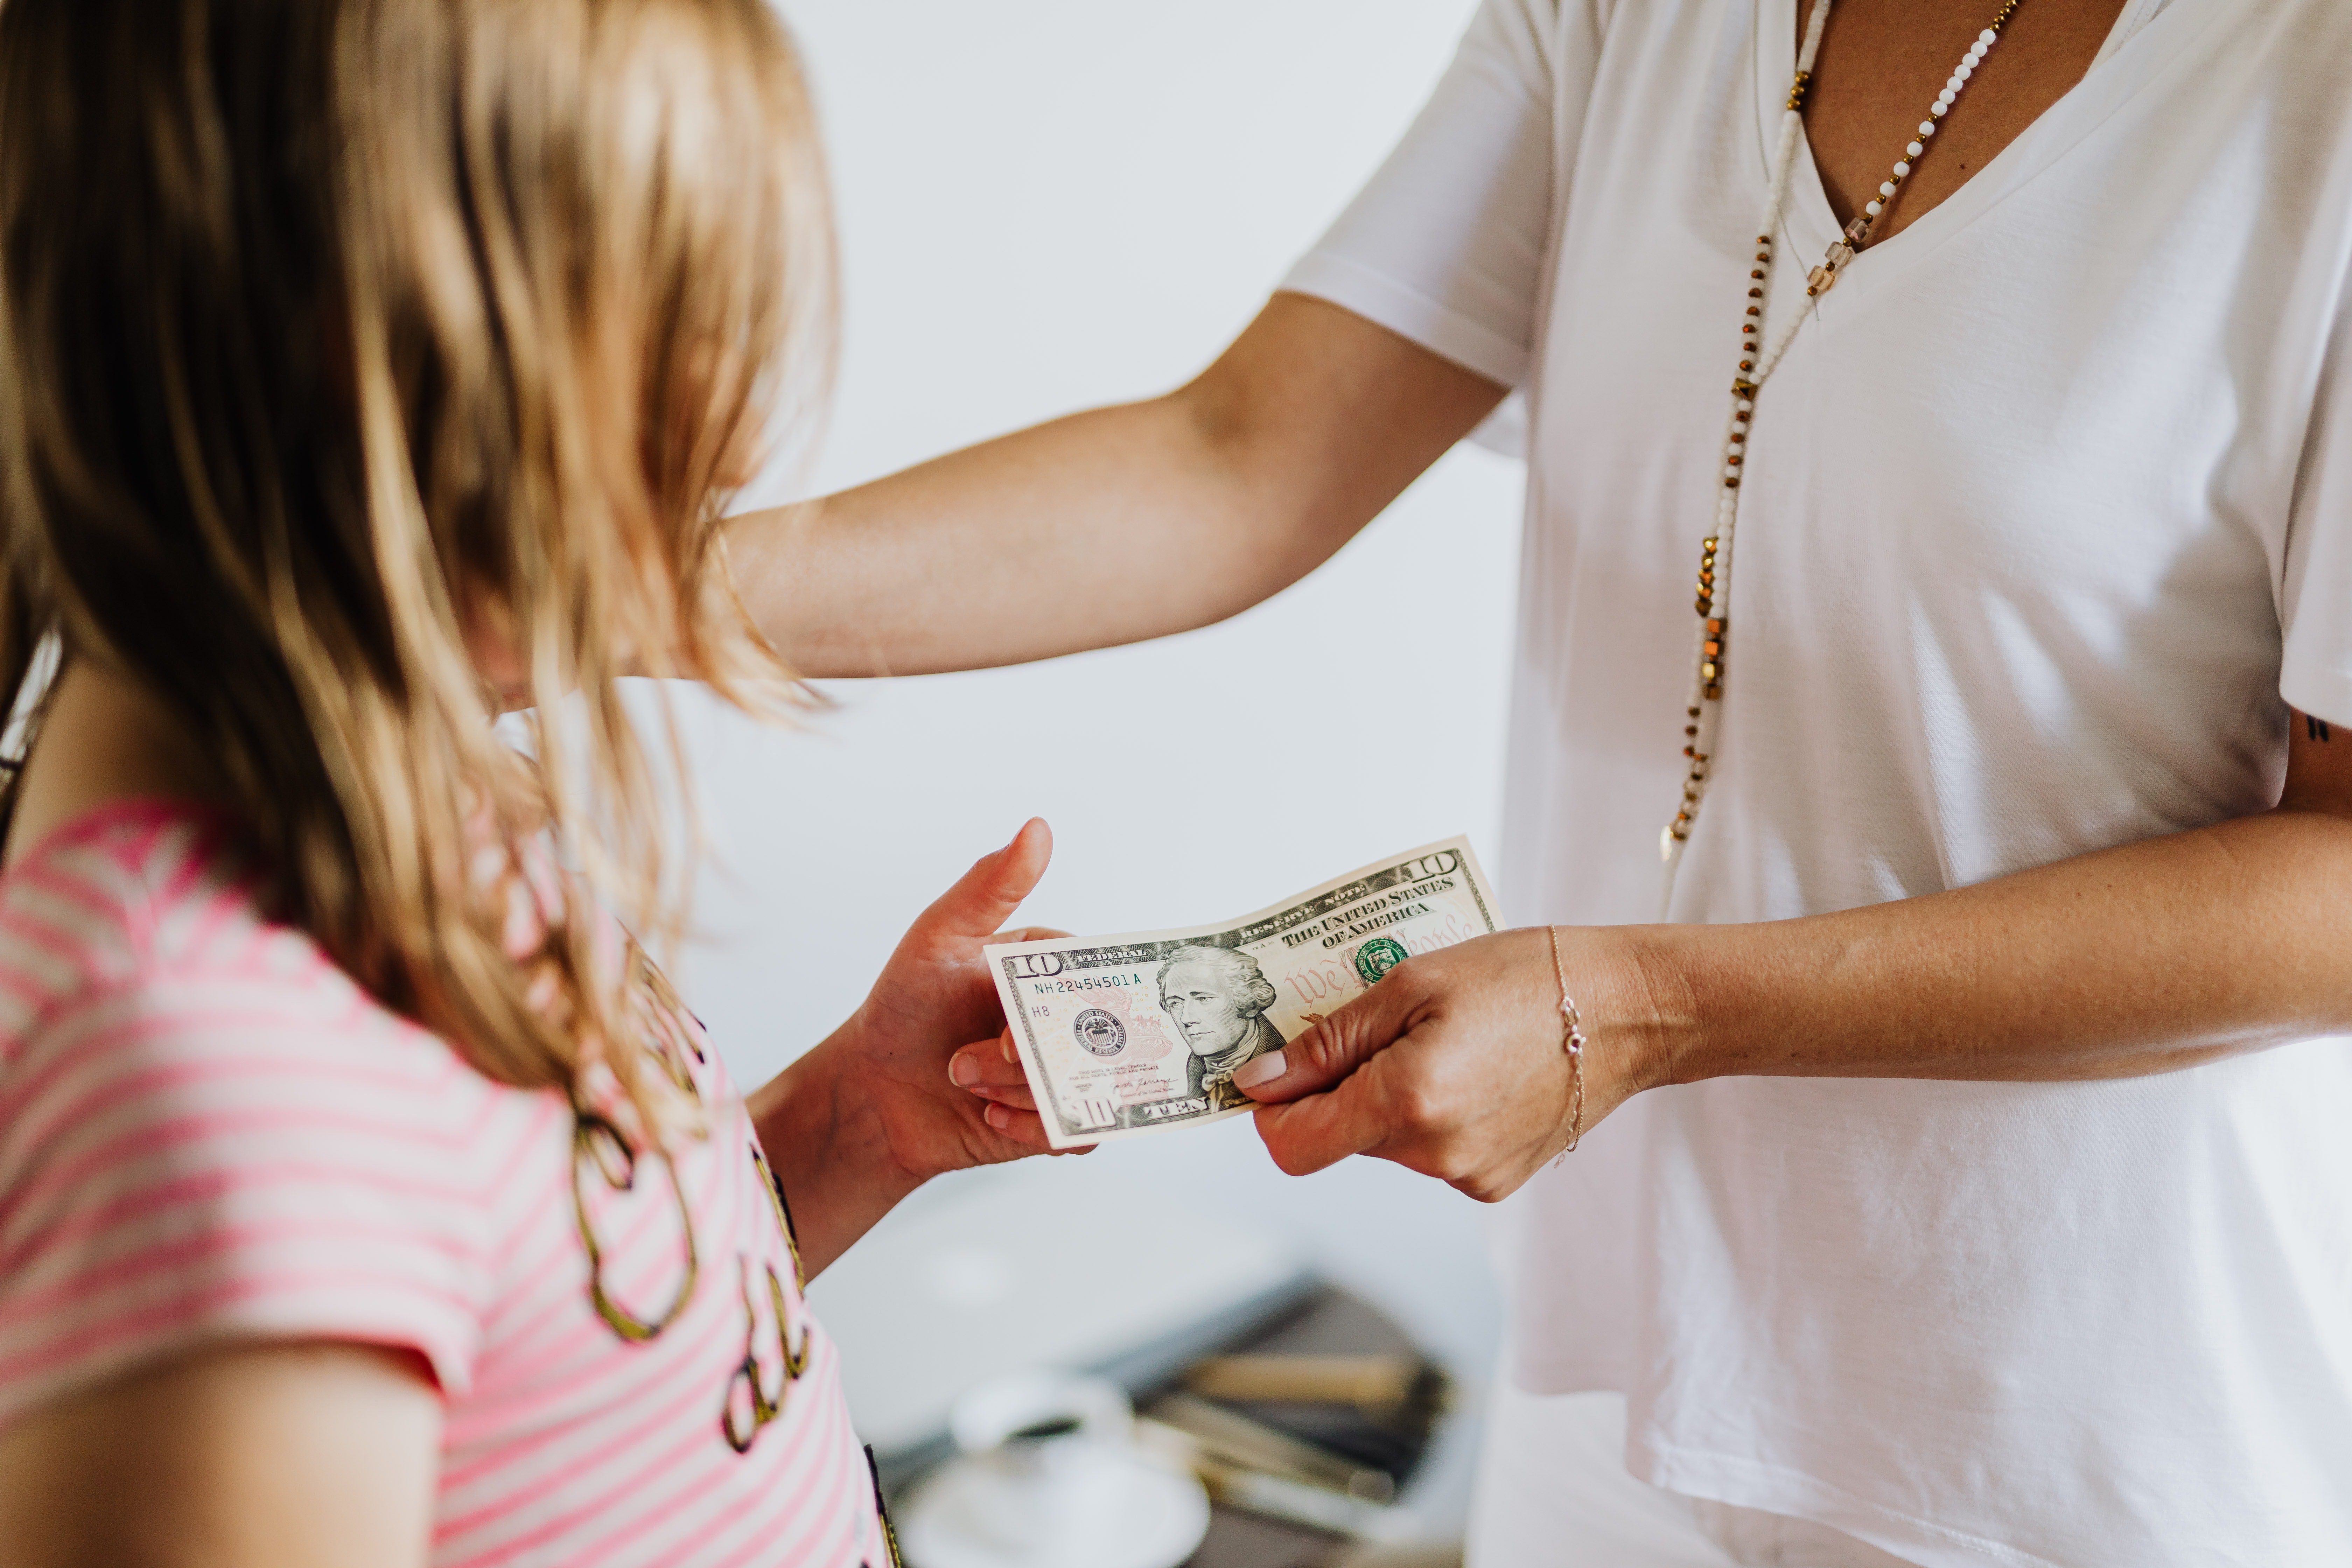 Person on Reddit claimed they despised parents who controlled their kids' money. | Source: Pexels